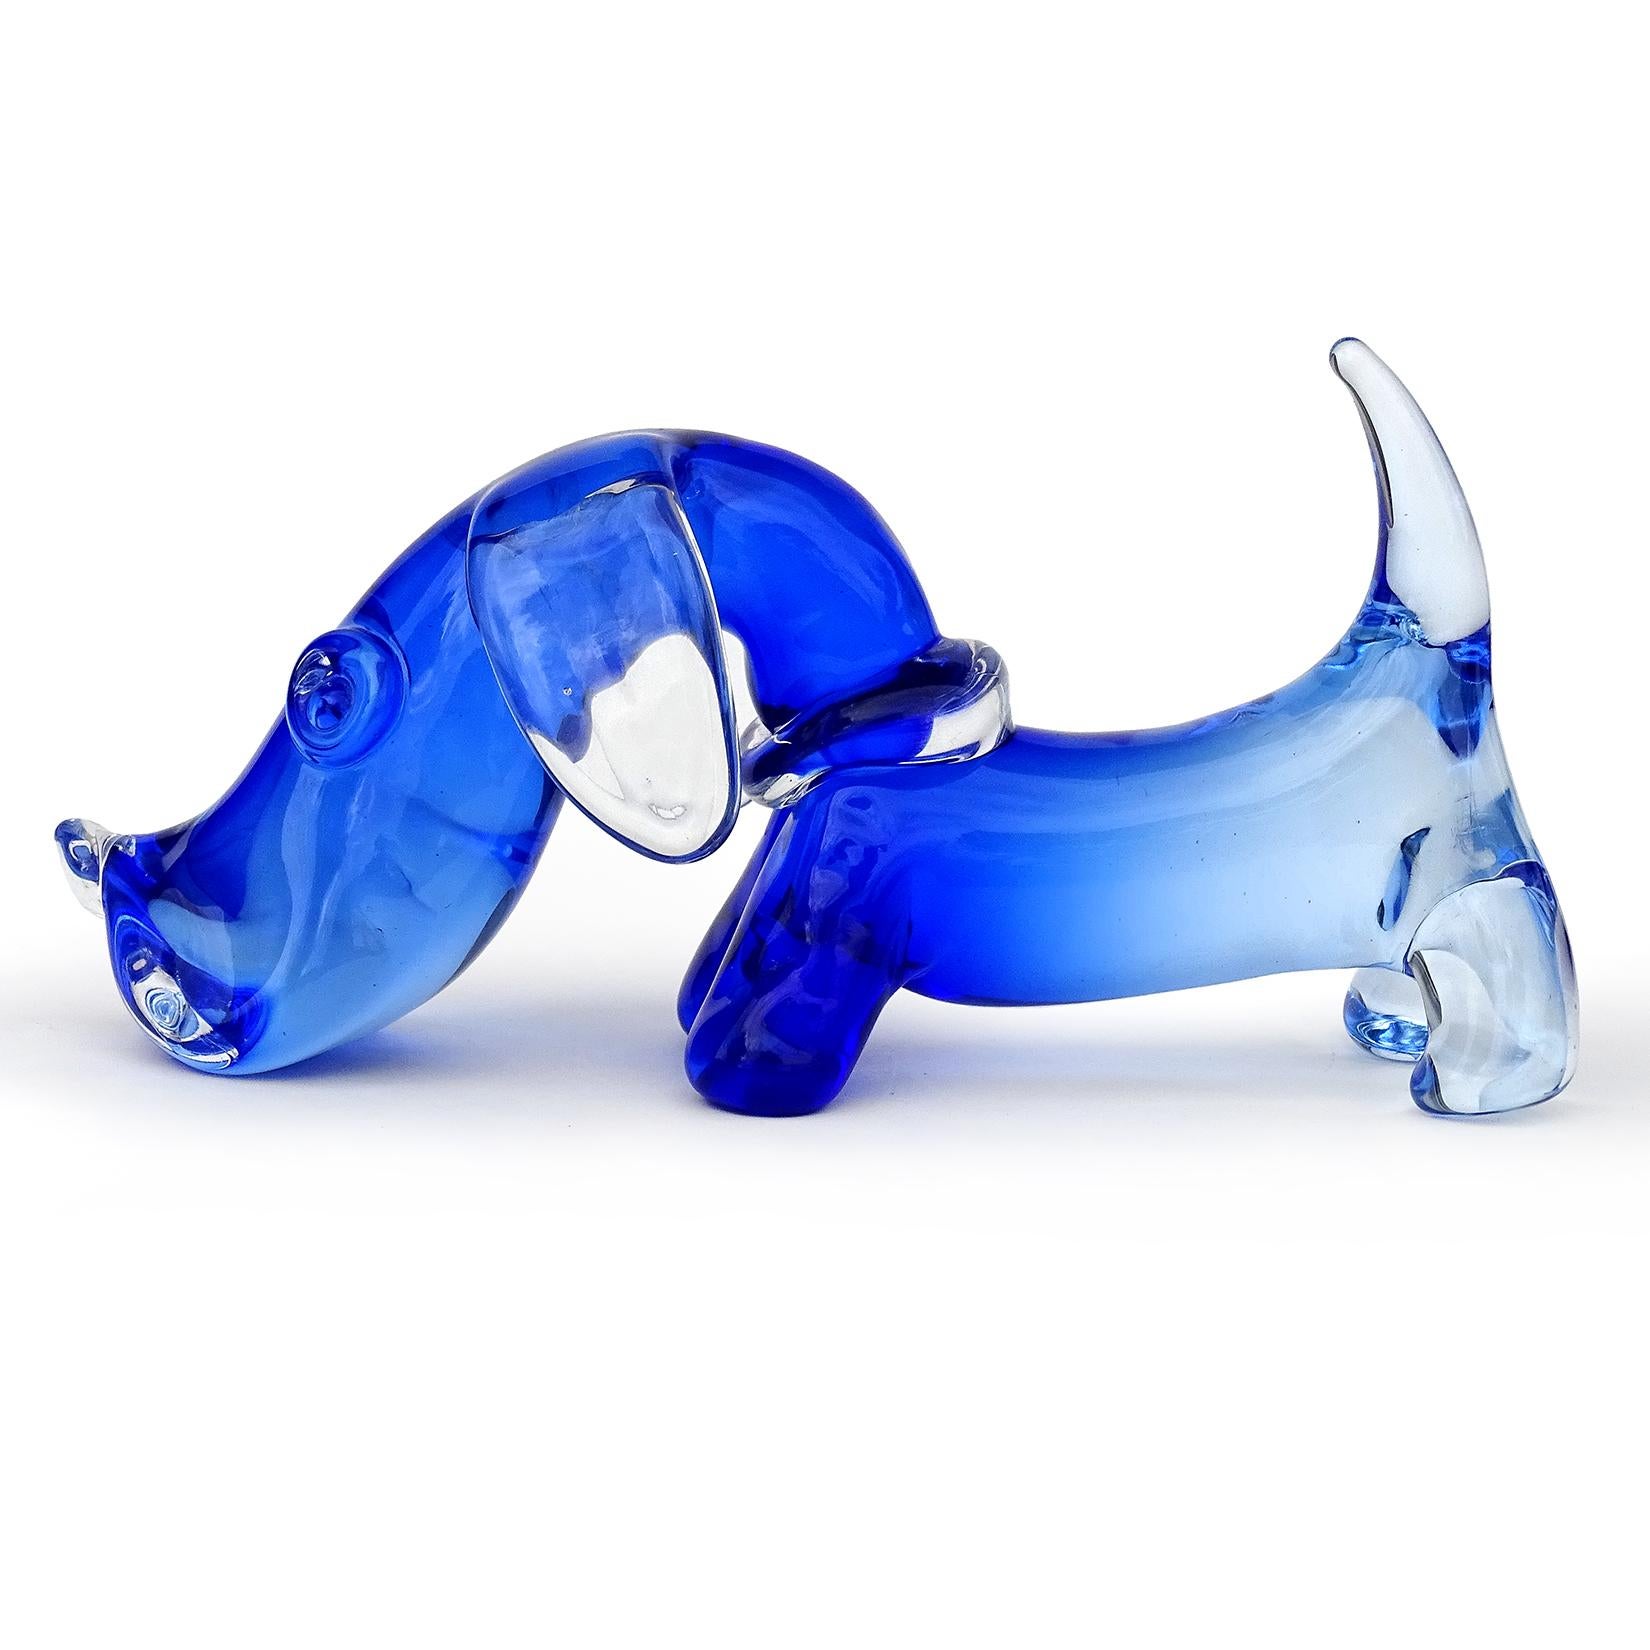 Beautiful and very cute, vintage Murano hand blown Sommerso cobalt to light blue Italian art glass Dachshund puppy dog sculpture. Documented to designer Archimede Seguso. The dog has a clear collar, ears, and tongue sticking out. A must for the dog